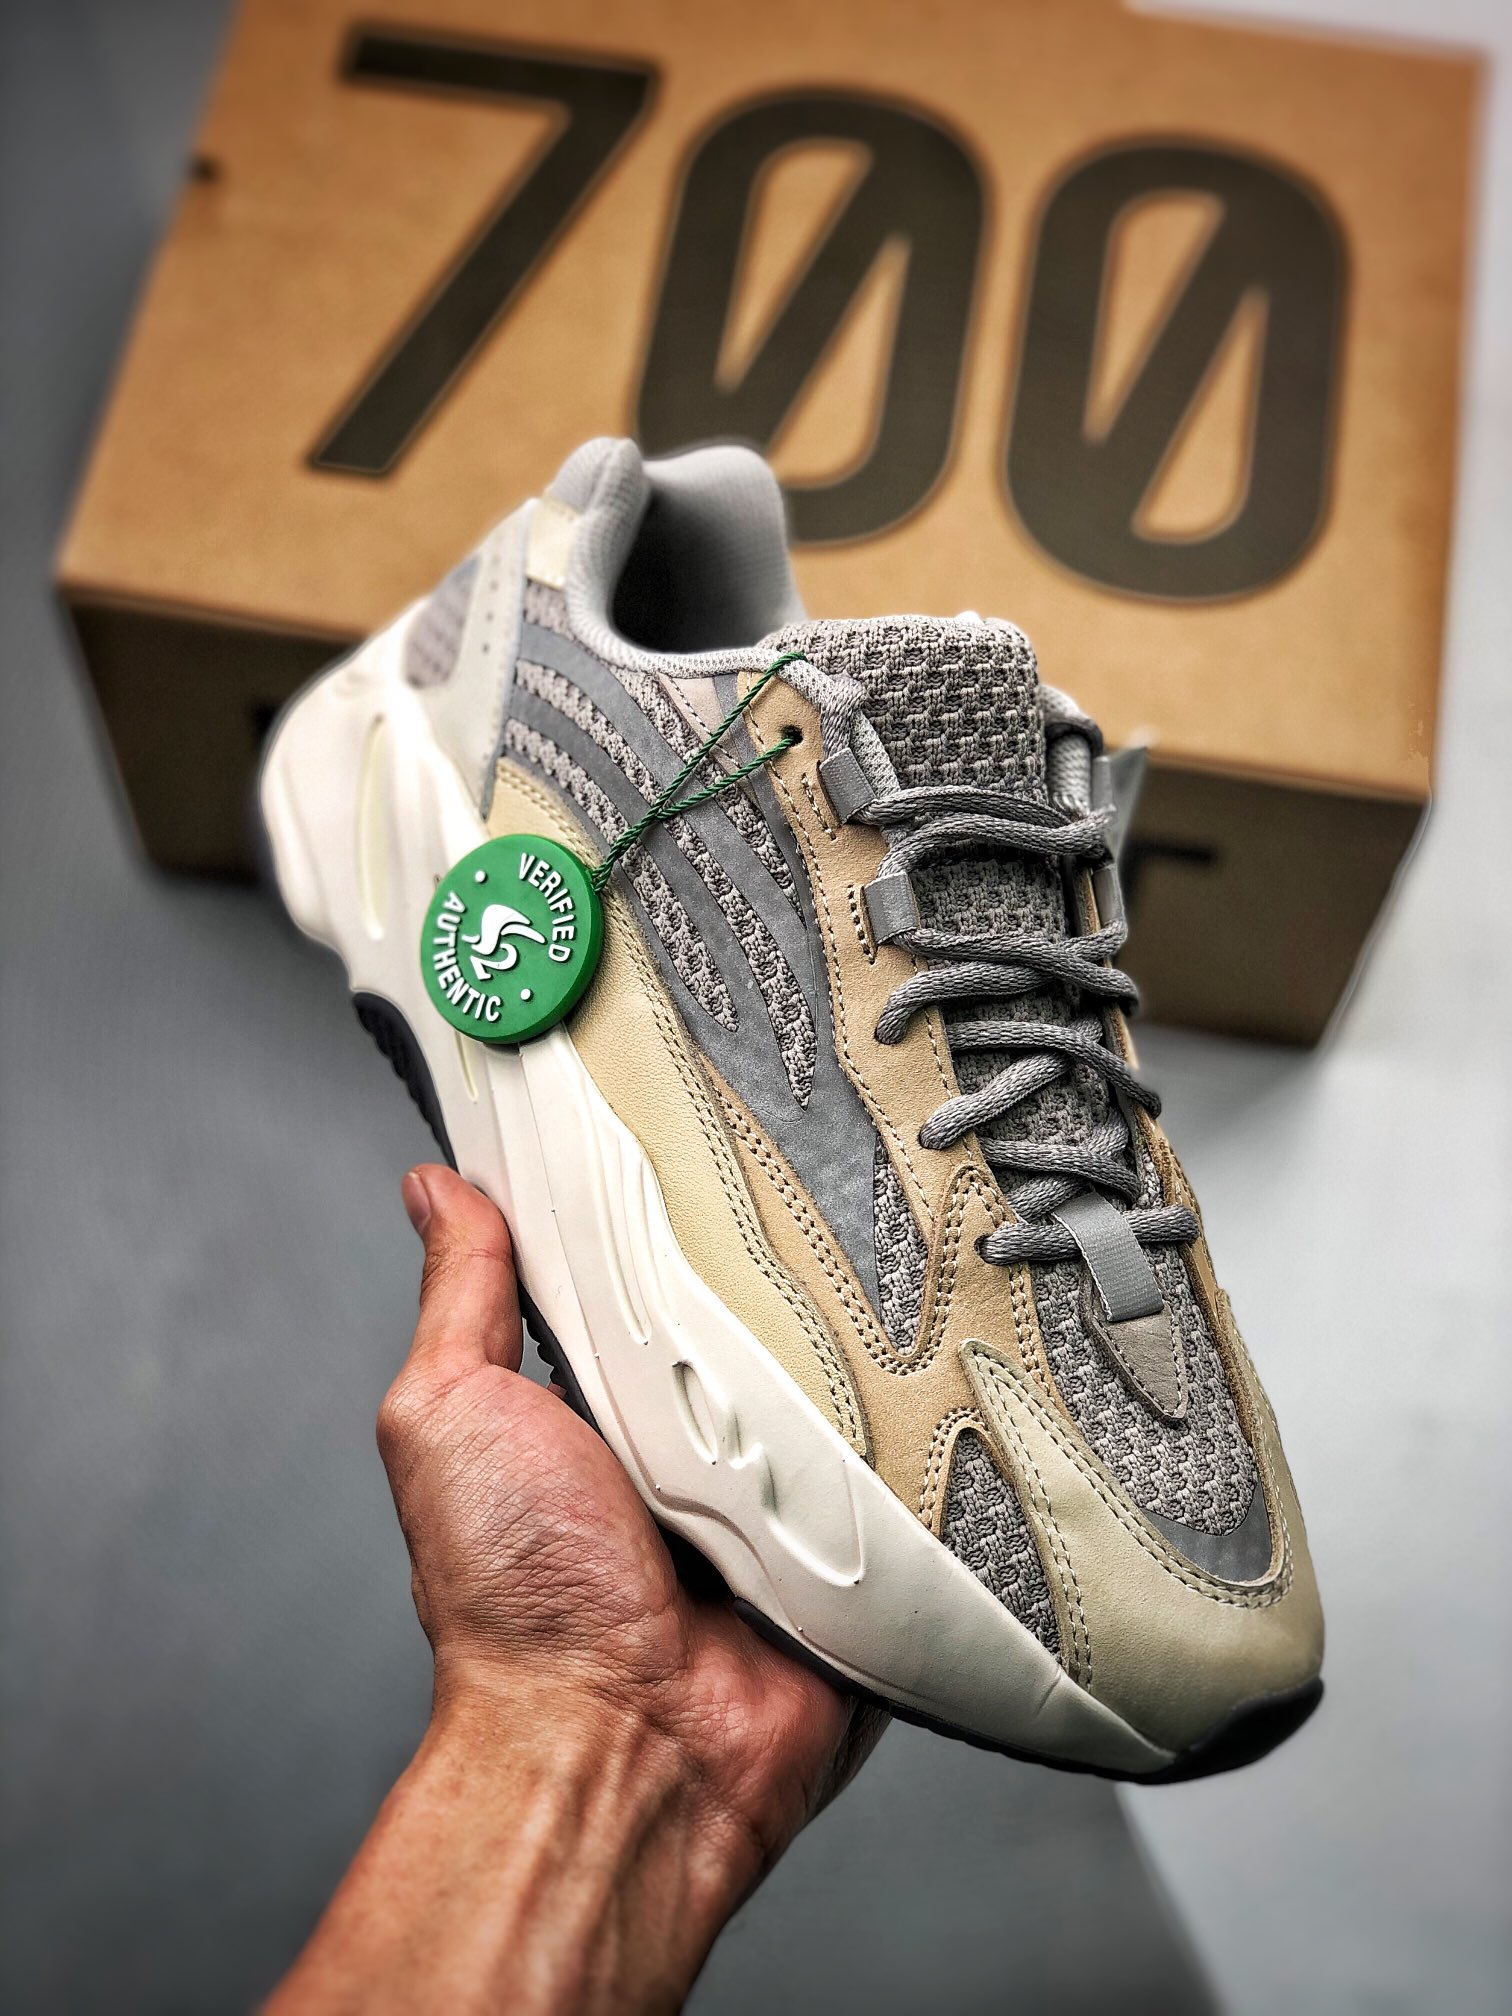 Adidas Yeezy Boost 700 V2 Cream Gy7924 For Sale Sneaker Hello